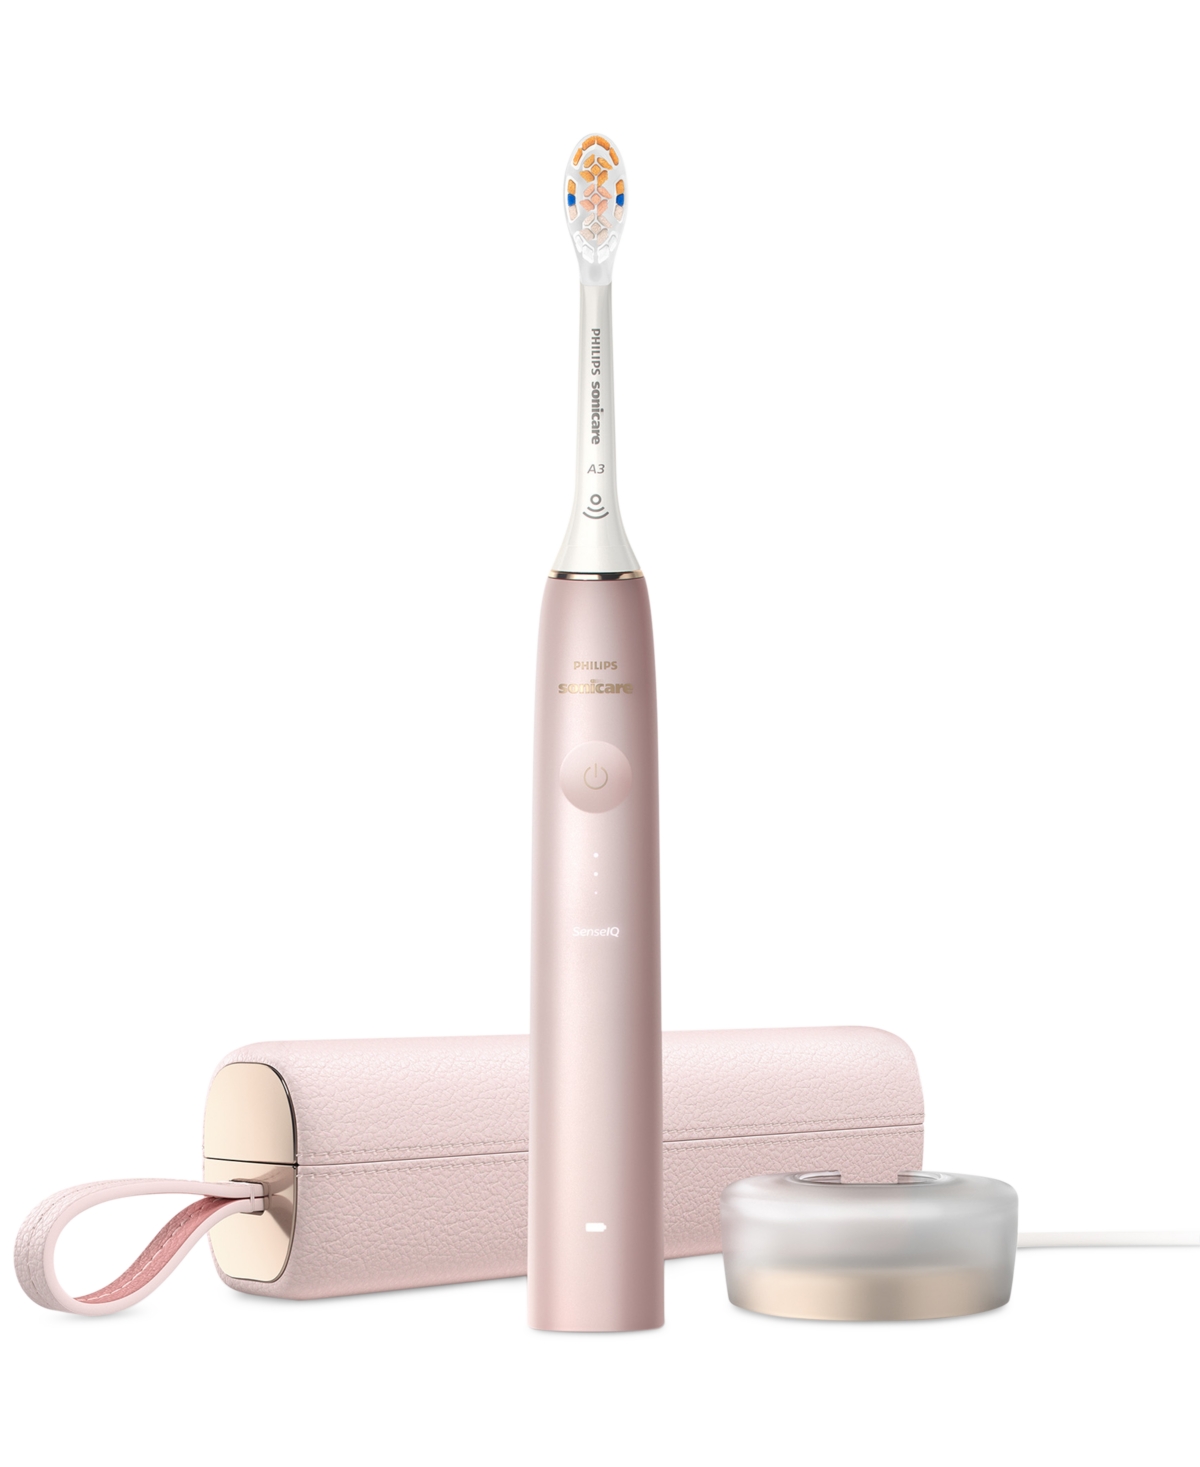 Philips Sonicare Prestige 9900 Cordless Electric Toothbrush In Pink